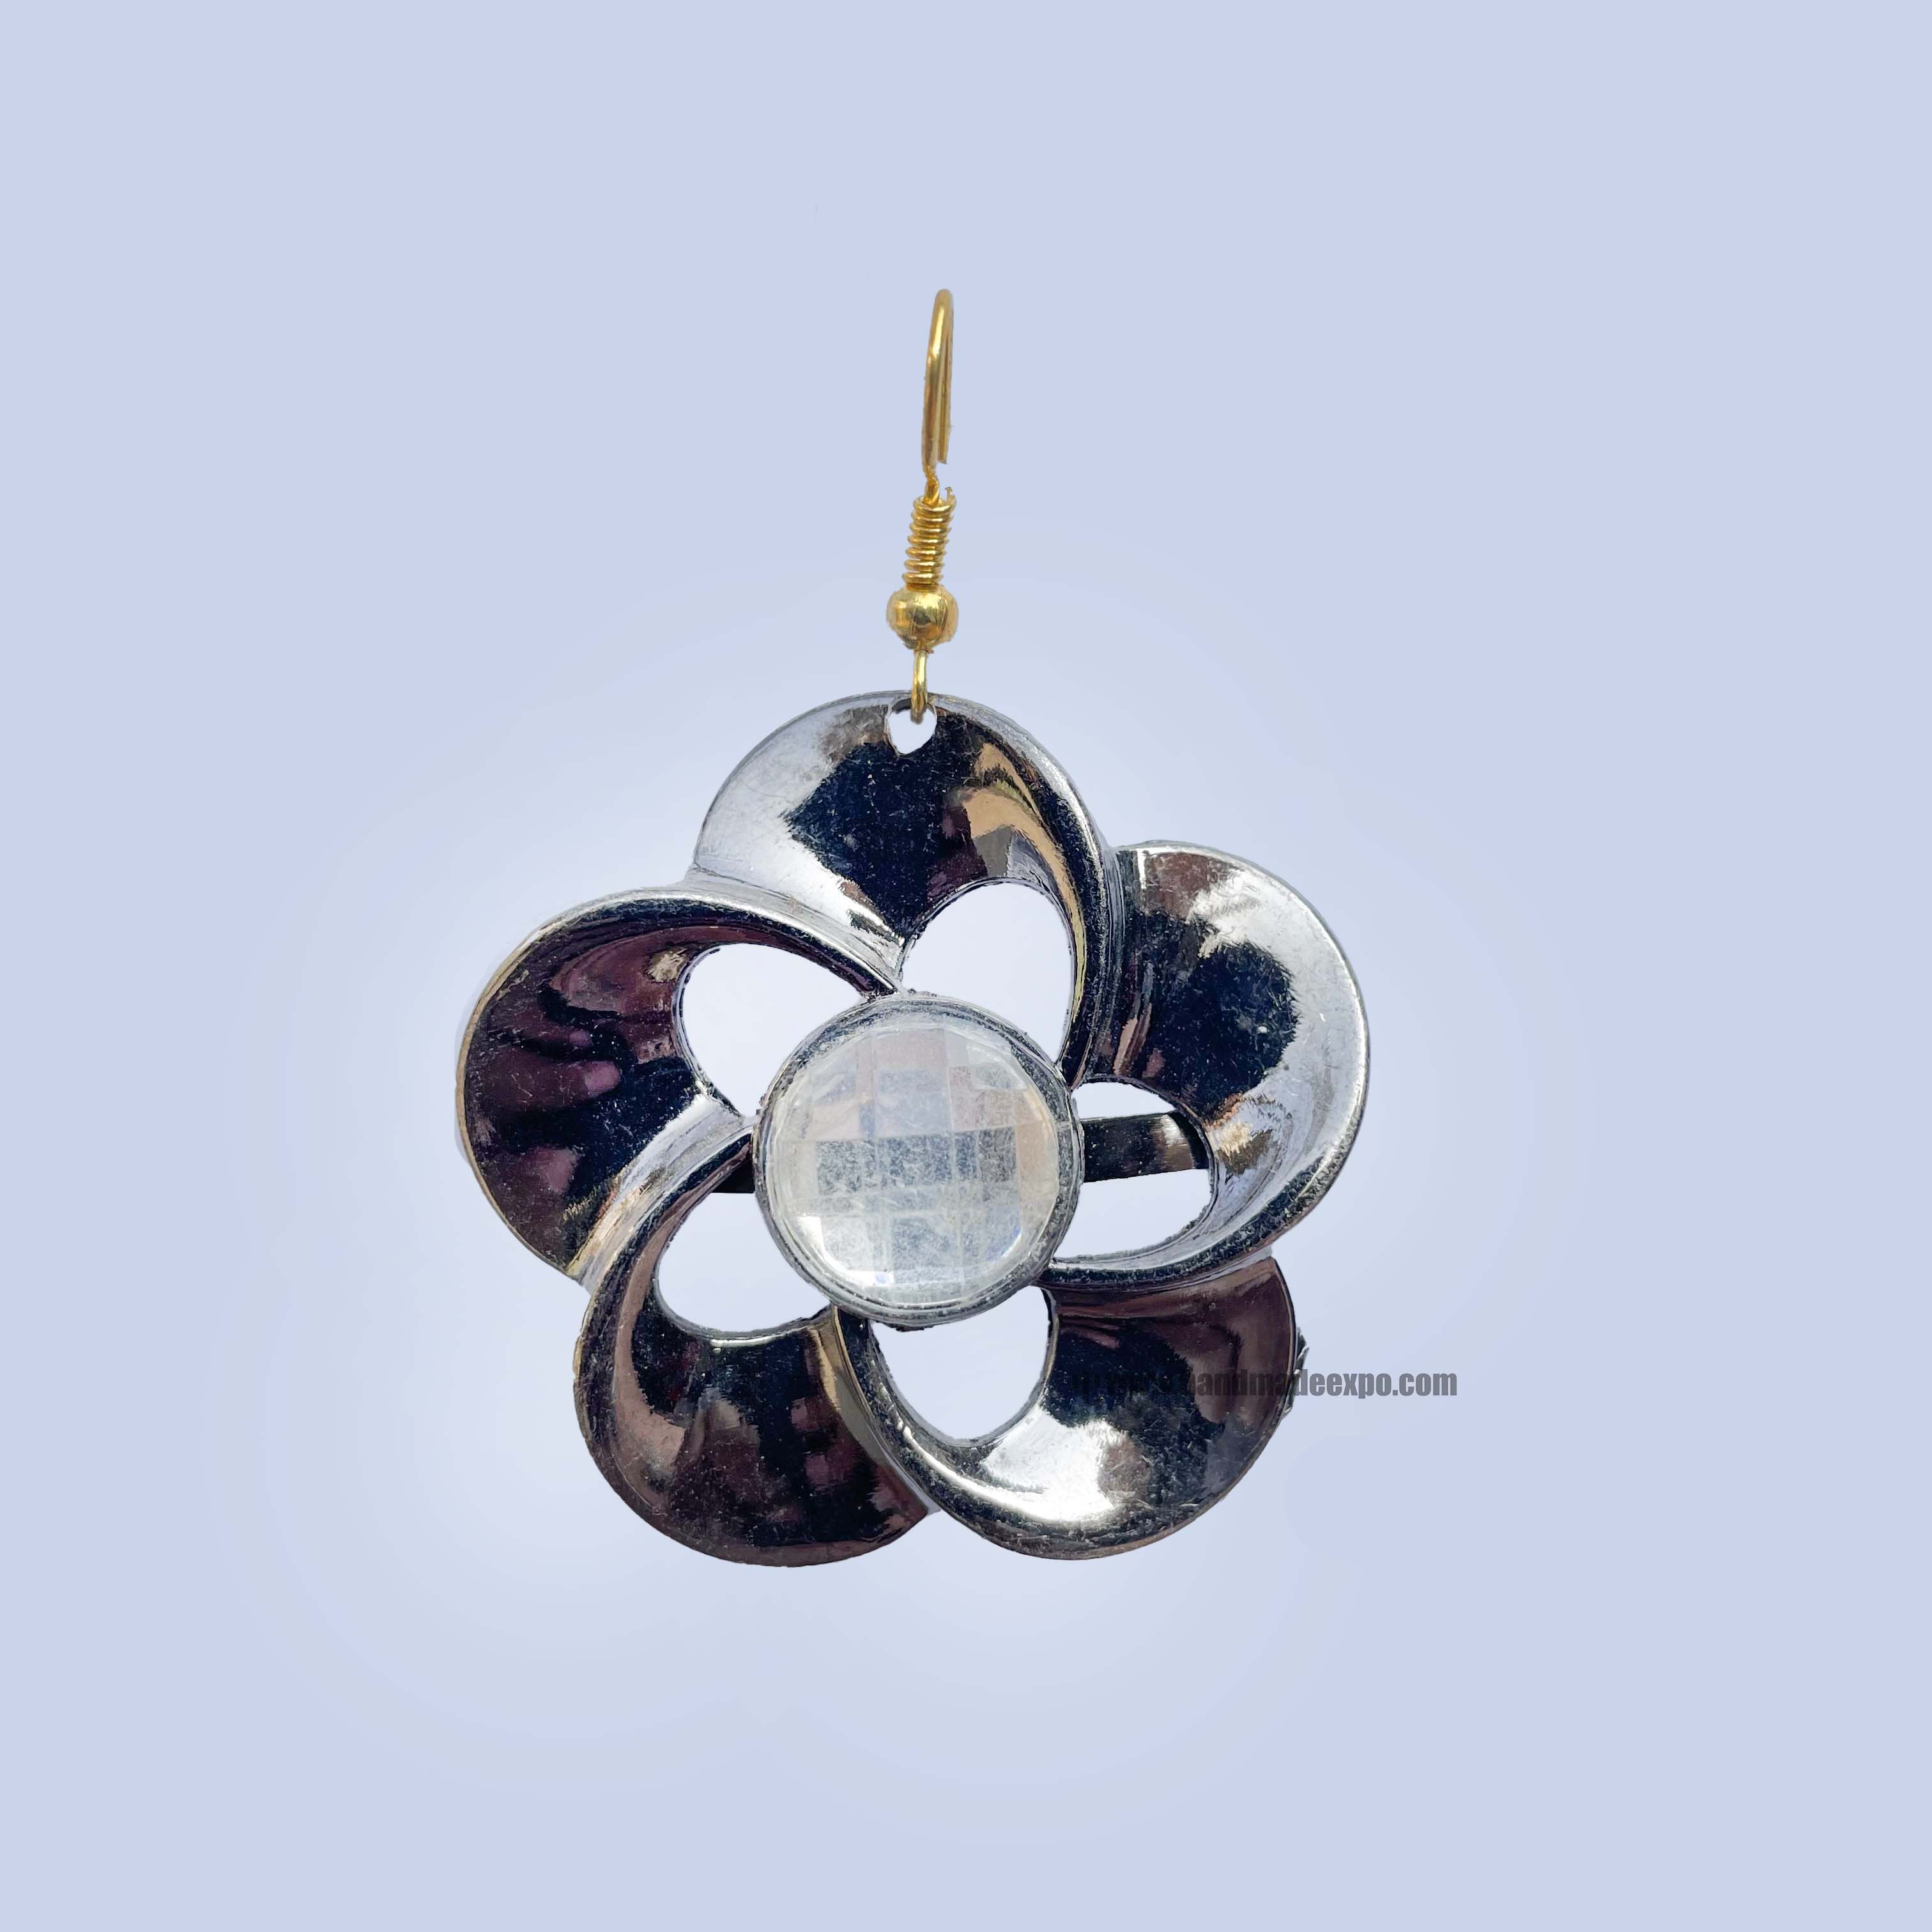 Metal Earring flower Design, With Stone